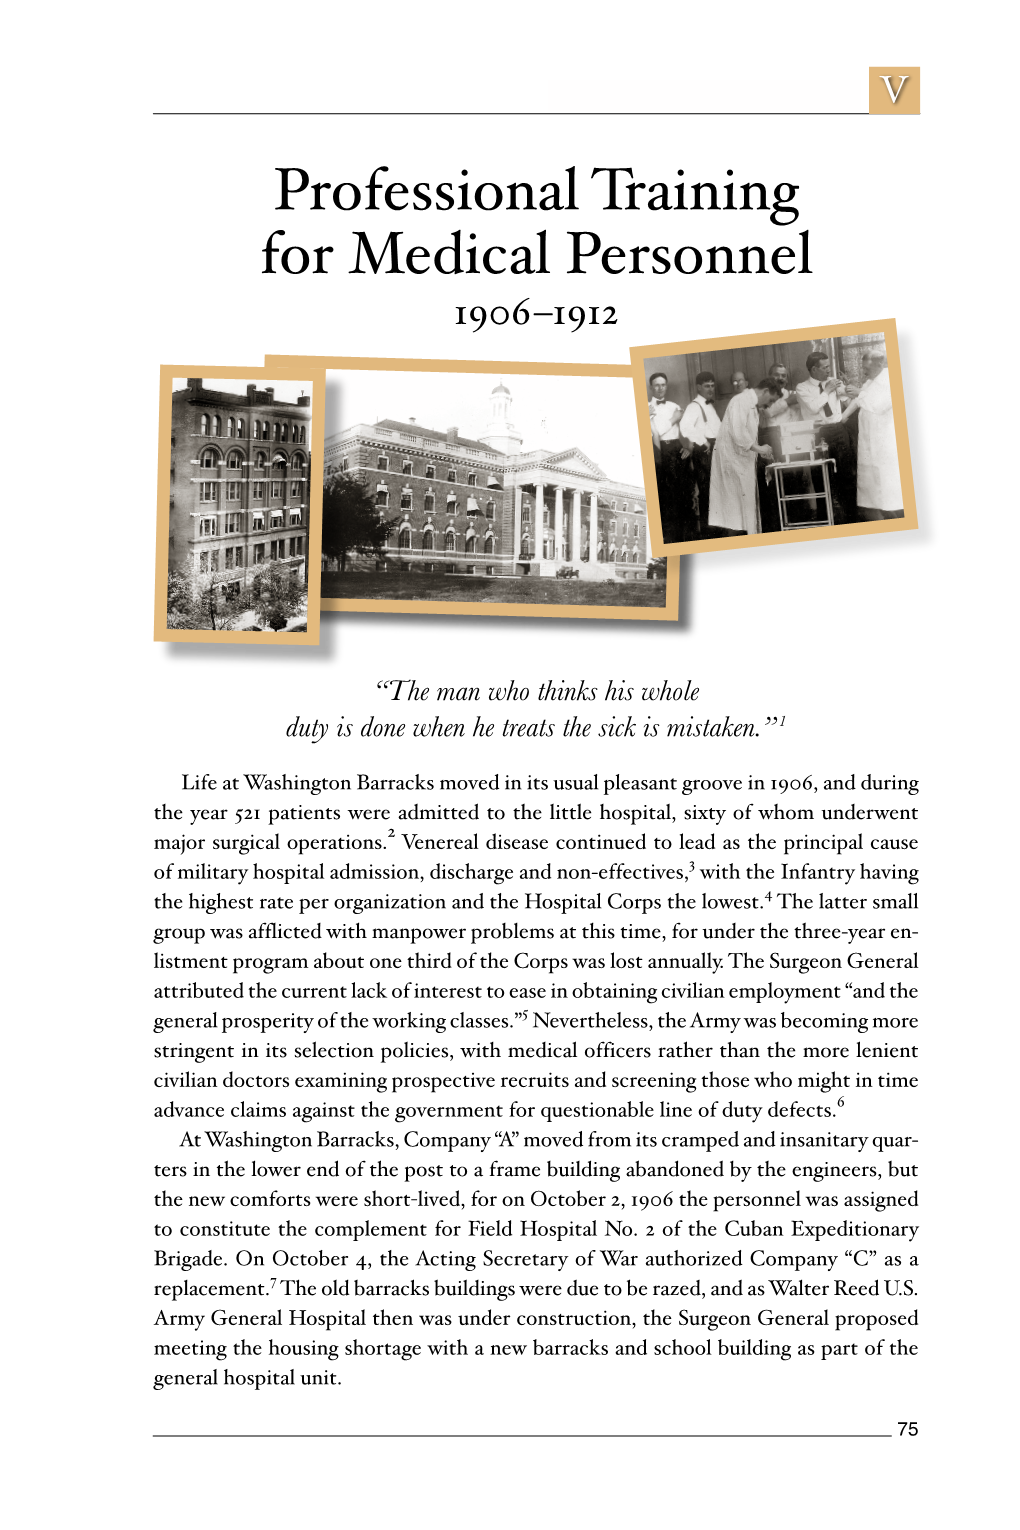 Chapter 5, Borden's Dream: the Walter Reed Army Medical Center in Washington, DC, Professional Training for Medical Personnel